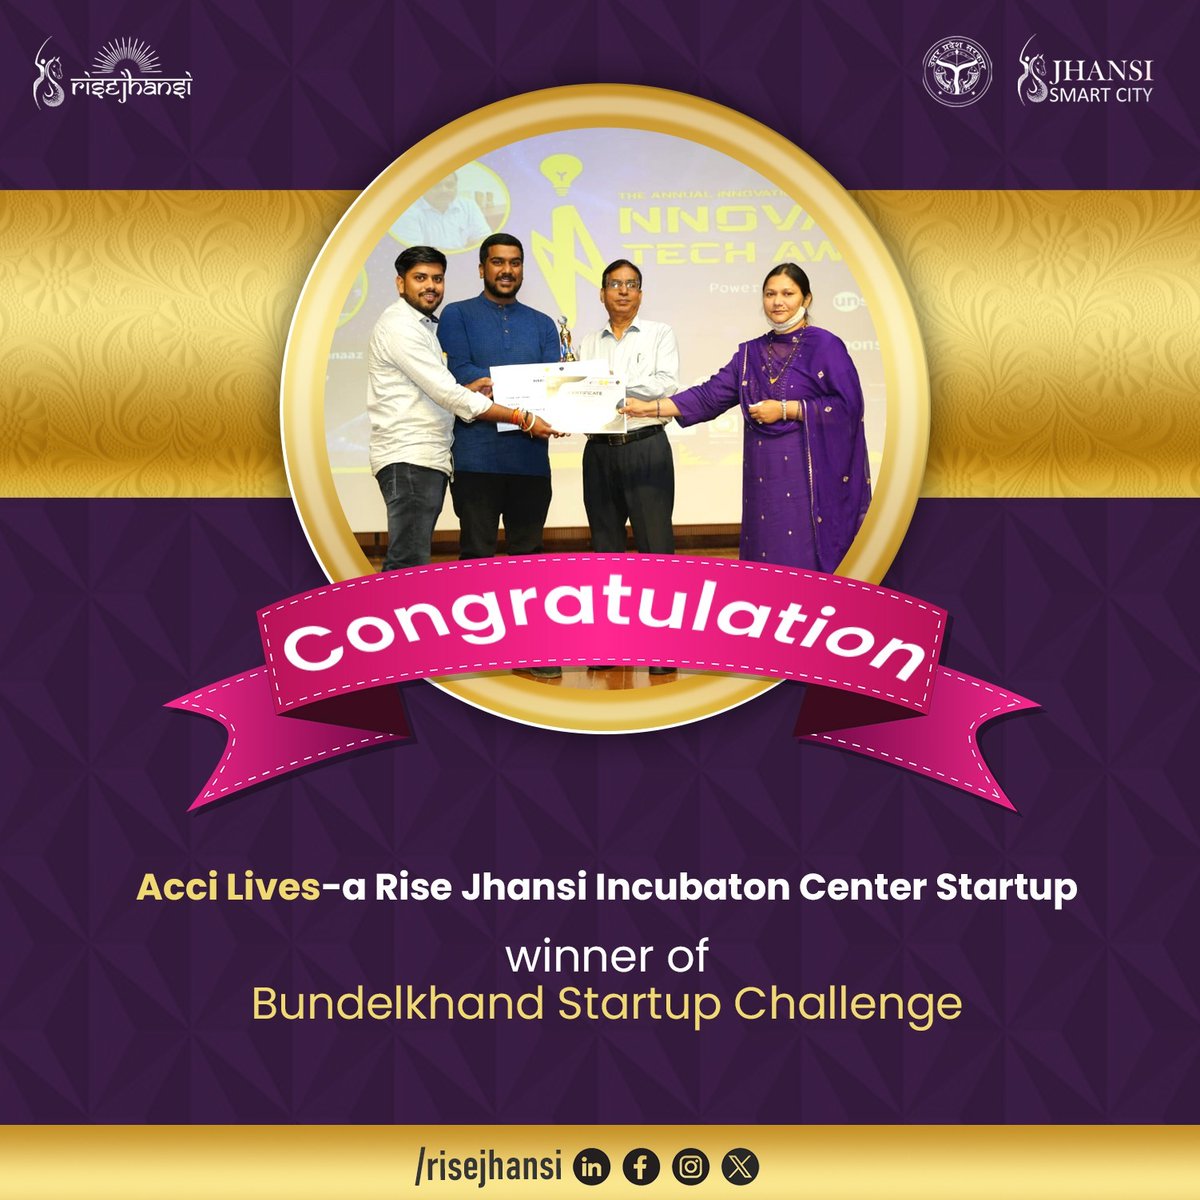 🎉 Congrats to Acci Lives! 🏆 Winner of Bundelkhand Startup Challenge from our RISE Jhansi Incubation  Center. Proud of their innovation! #RISEJhansi #StartupIndia #IM #Incubationmasters